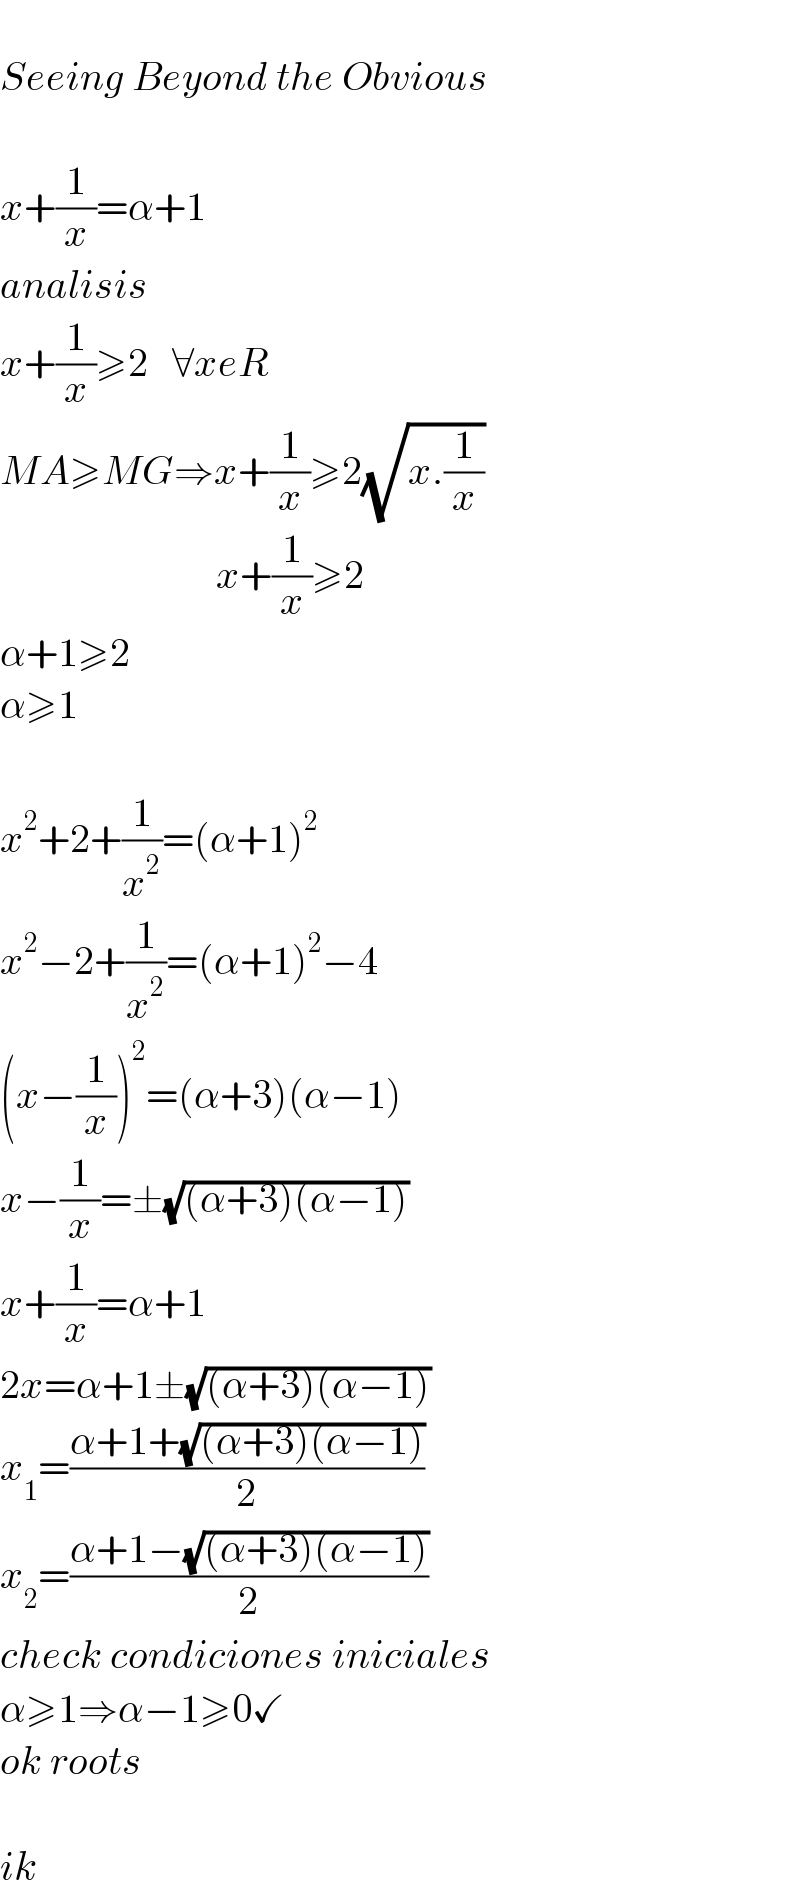   Seeing Beyond the Obvious    x+(1/x)=α+1  analisis  x+(1/x)≥2   ∀xeR  MA≥MG⇒x+(1/x)≥2(√(x.(1/x)))                             x+(1/x)≥2  α+1≥2  α≥1    x^2 +2+(1/x^2 )=(α+1)^2   x^2 −2+(1/x^2 )=(α+1)^2 −4  (x−(1/x))^2 =(α+3)(α−1)  x−(1/x)=±(√((α+3)(α−1)))  x+(1/x)=α+1  2x=α+1±(√((α+3)(α−1)))  x_1 =((α+1+(√((α+3)(α−1))))/2)  x_2 =((α+1−(√((α+3)(α−1))))/2)  check condiciones iniciales  α≥1⇒α−1≥0✓  ok roots    ik  